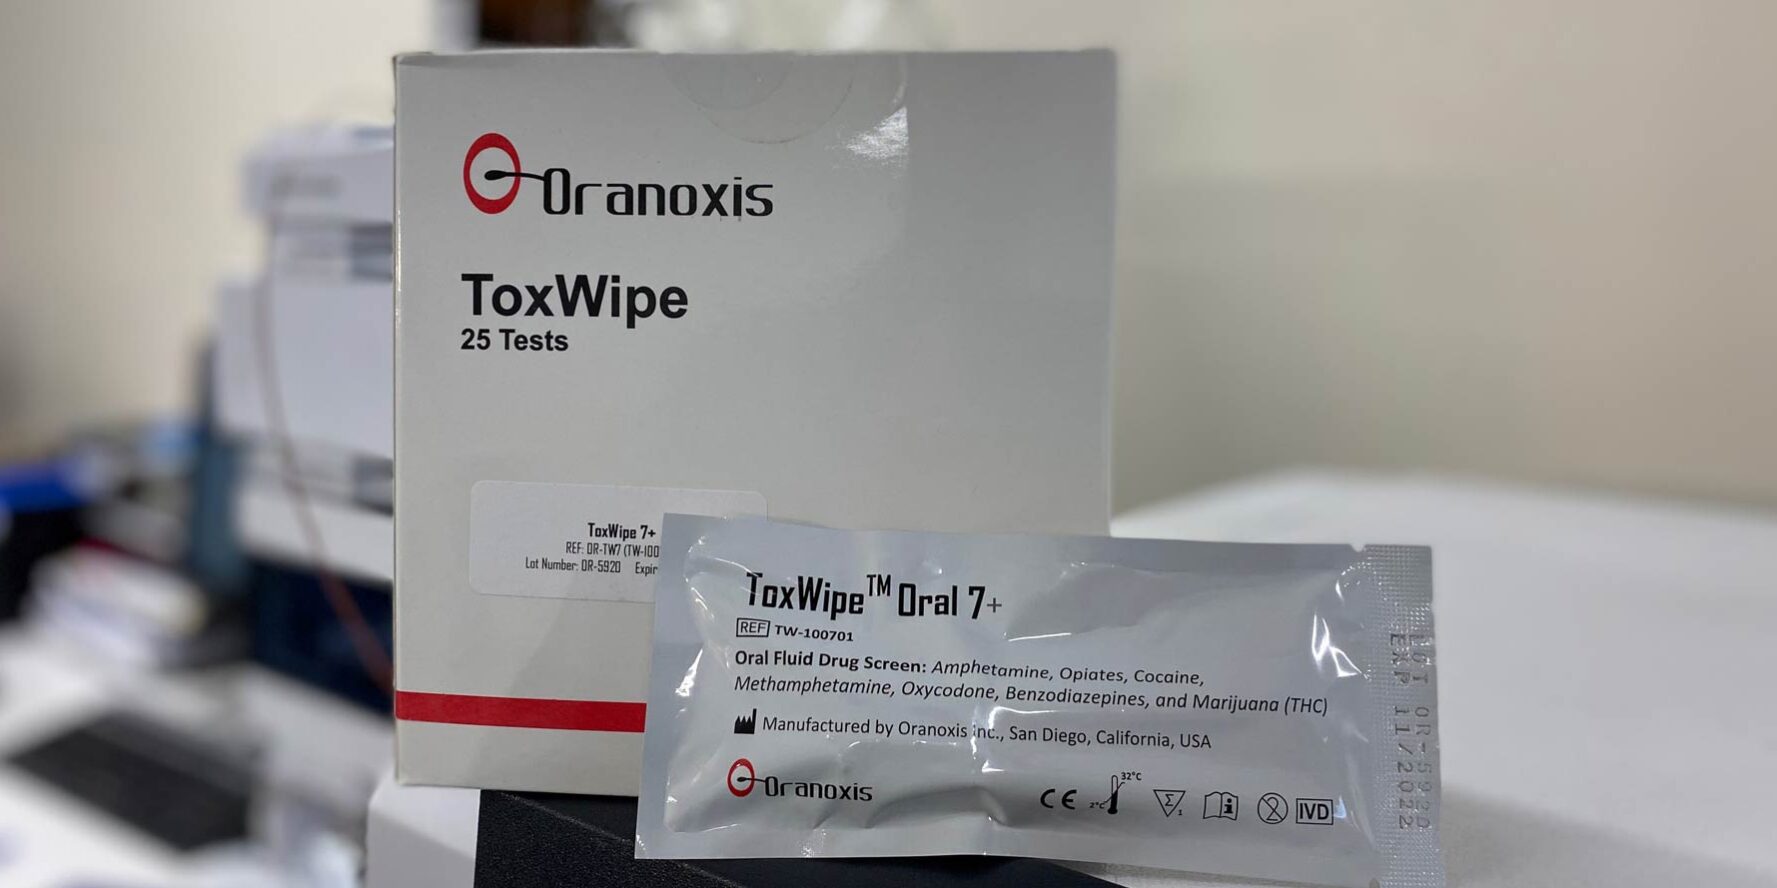 ToxWipe 7 – Our Most Comprehensive Onsite Oral Drug Testing Device